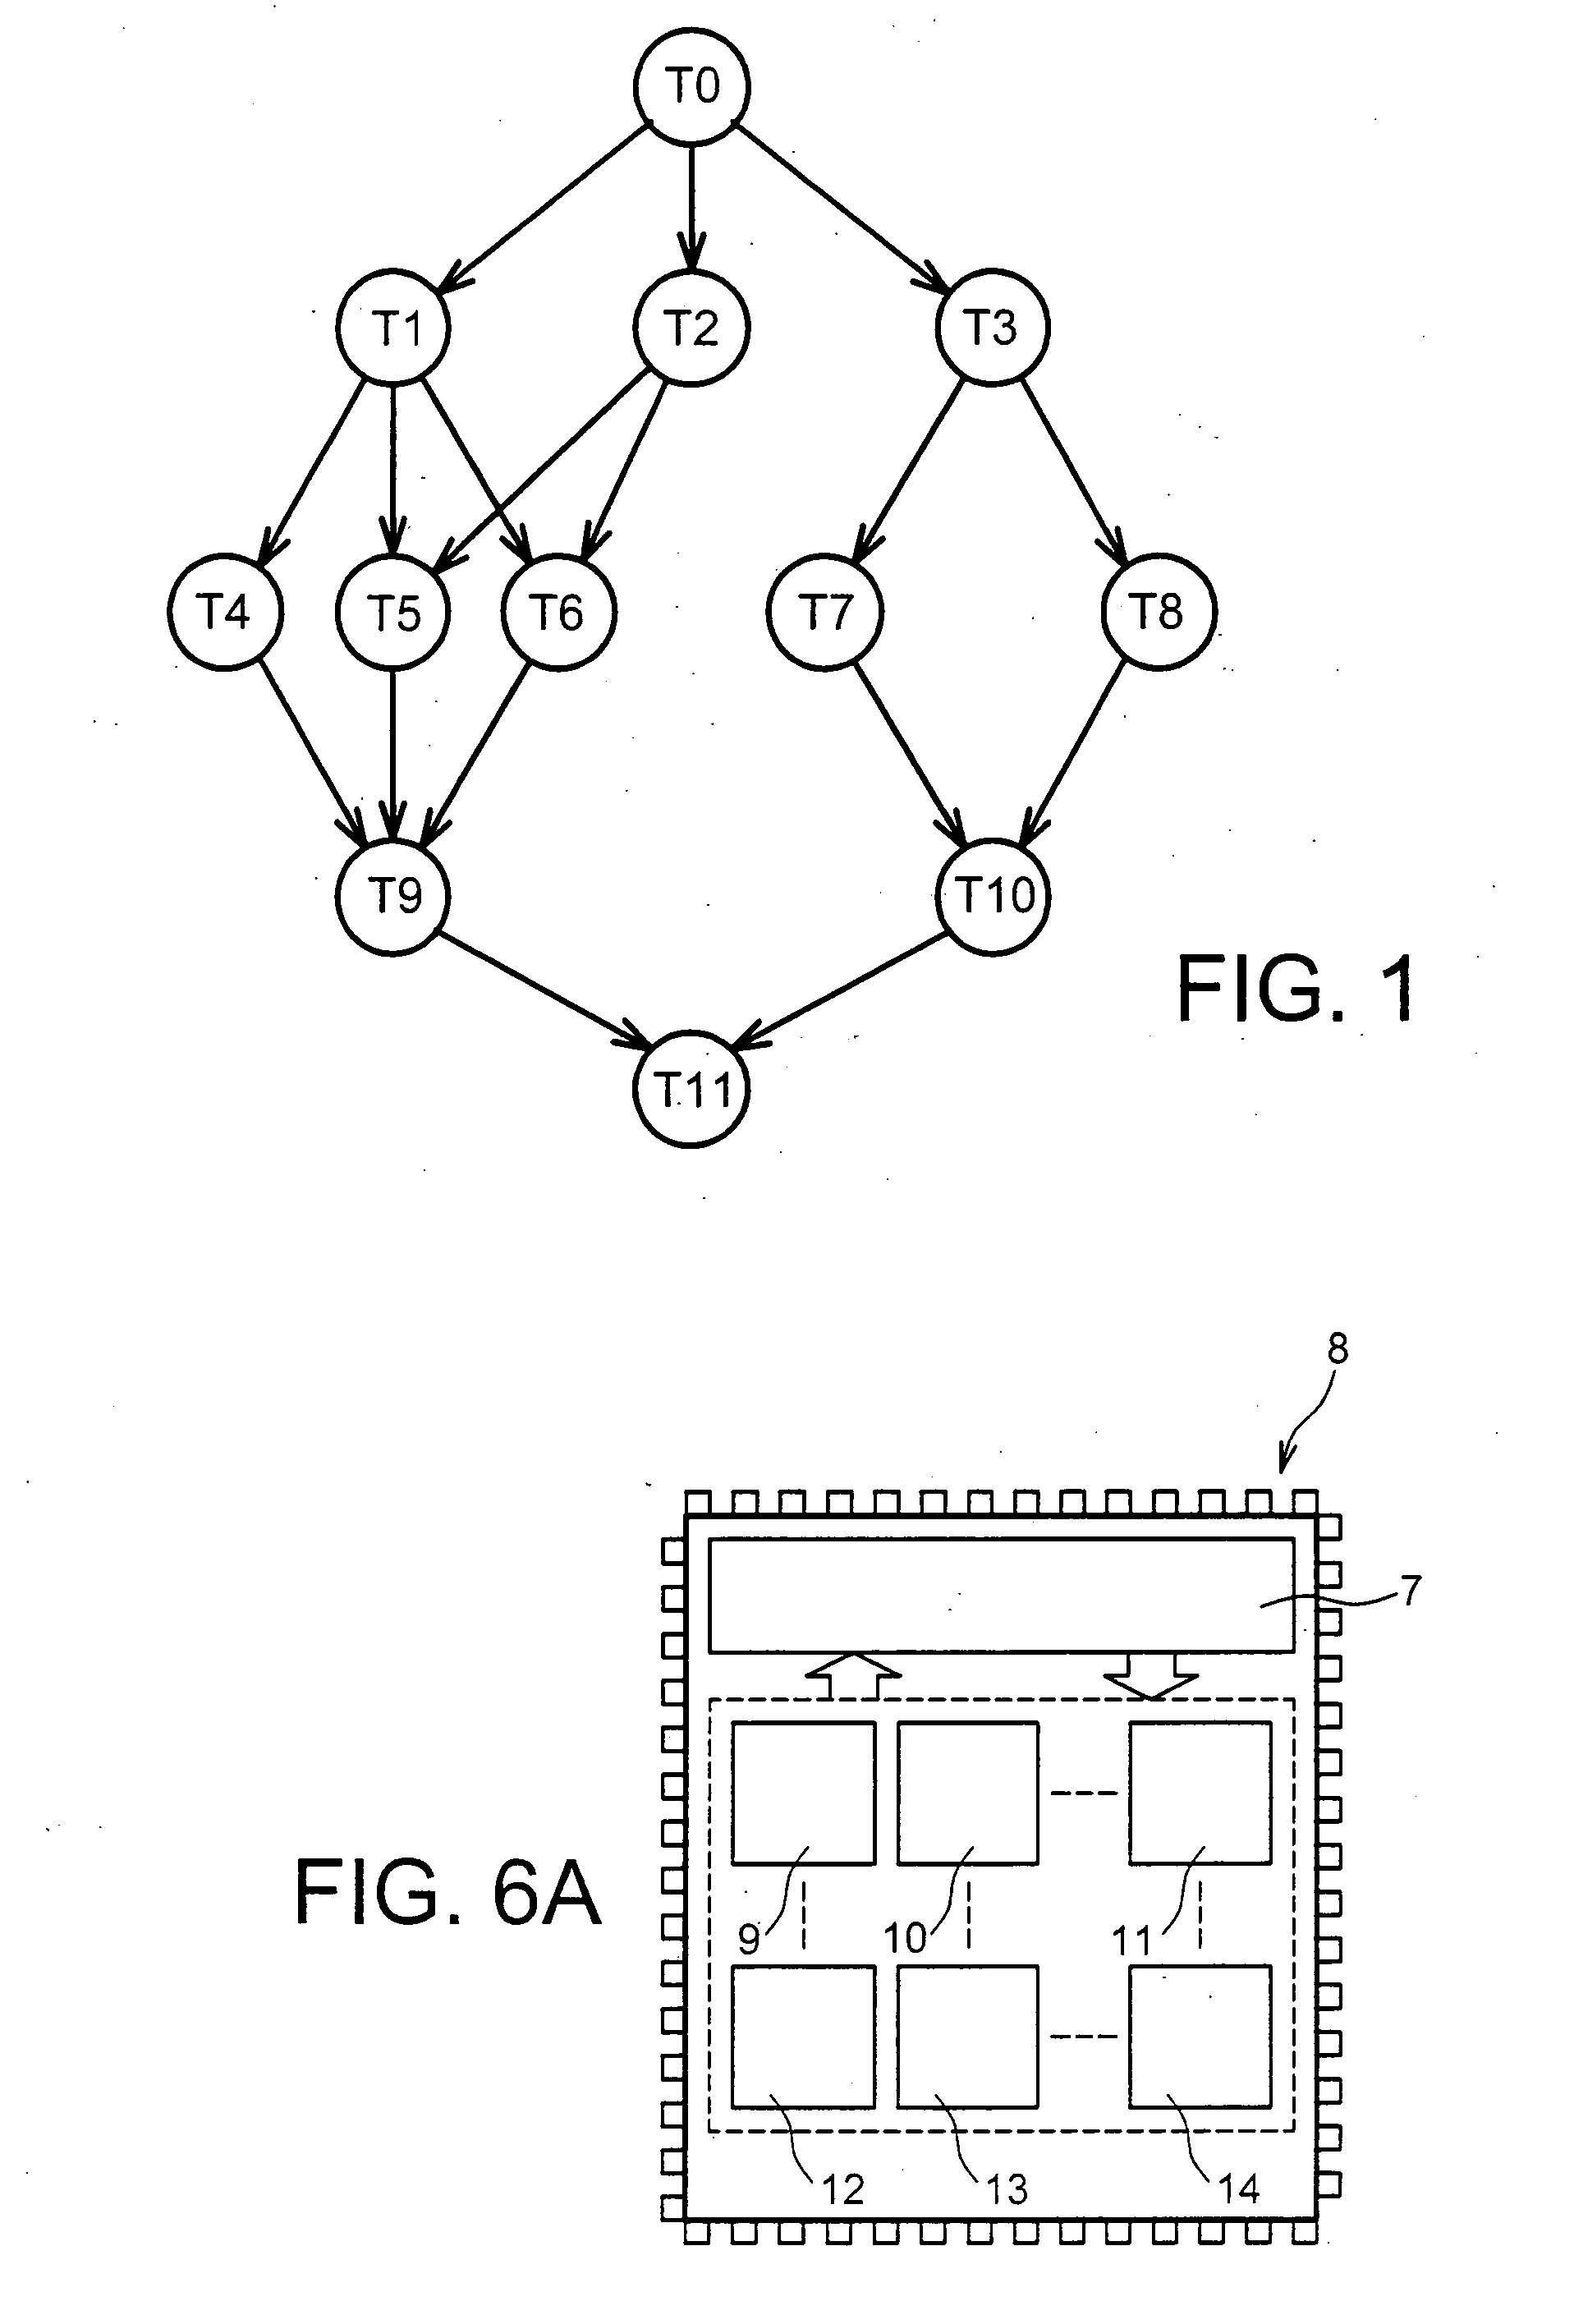 Task Processing Scheduling Method and Device for Applying the Method